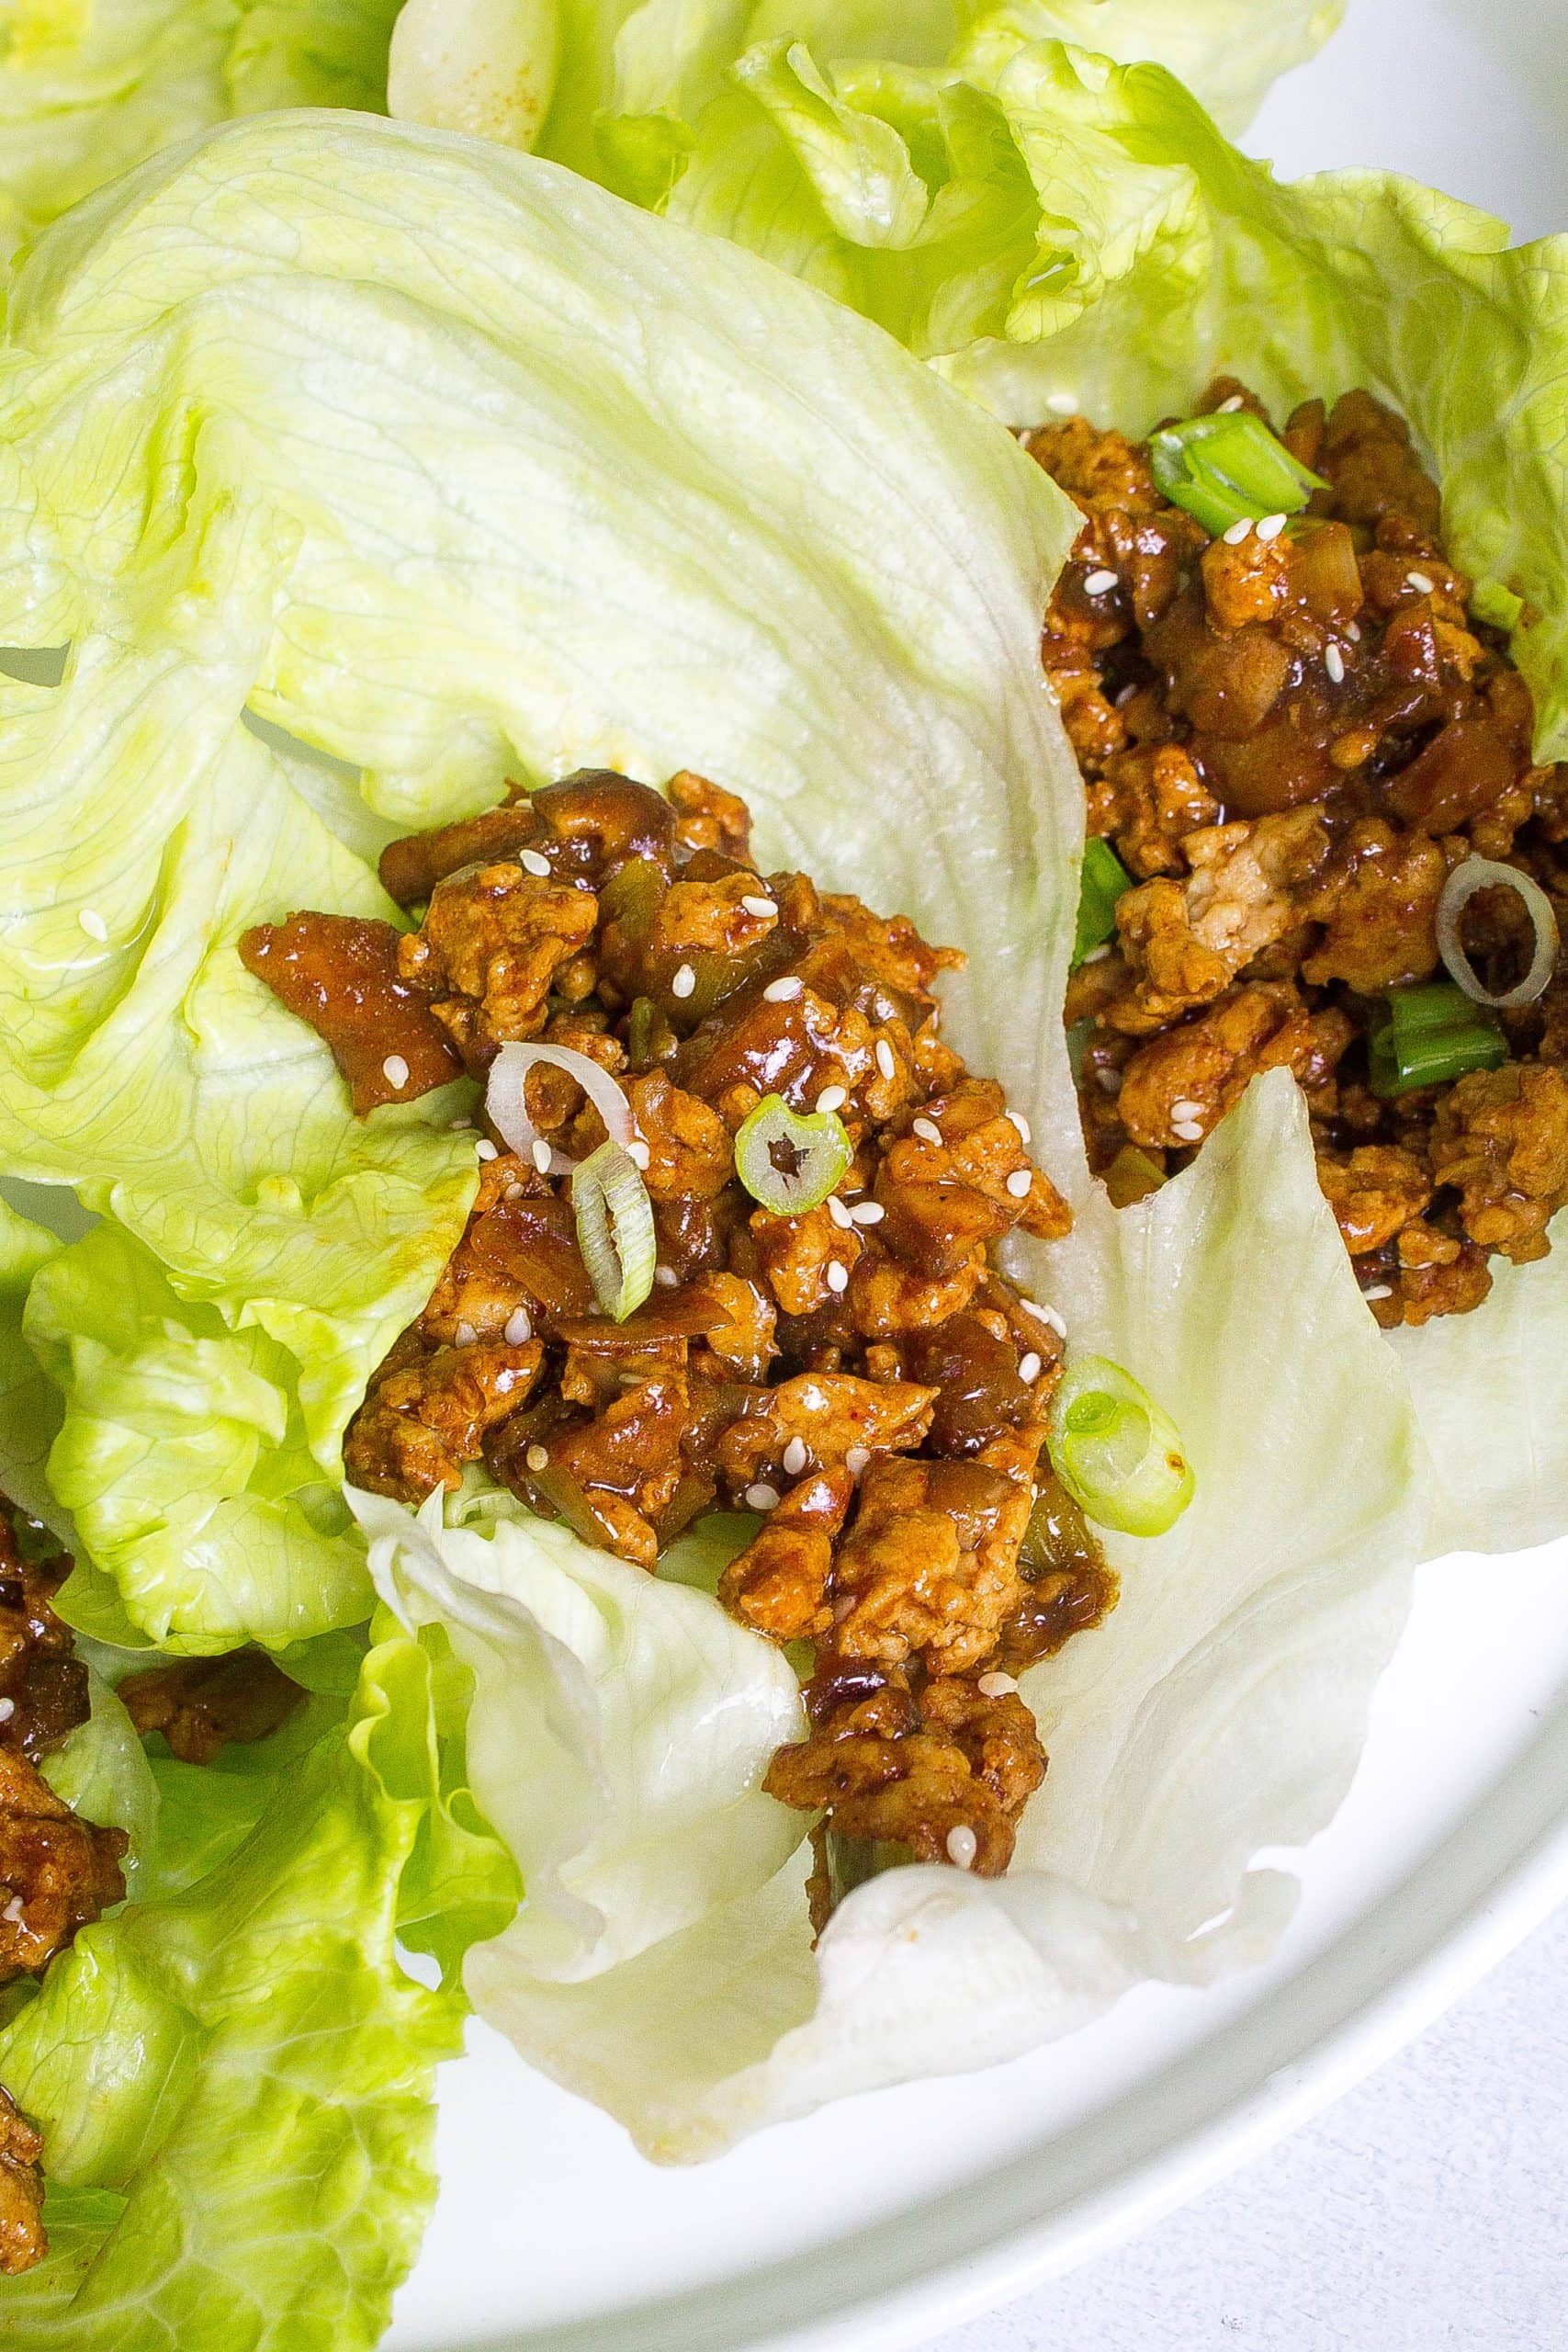 PF Chang's Chicken Lettuce Wraps